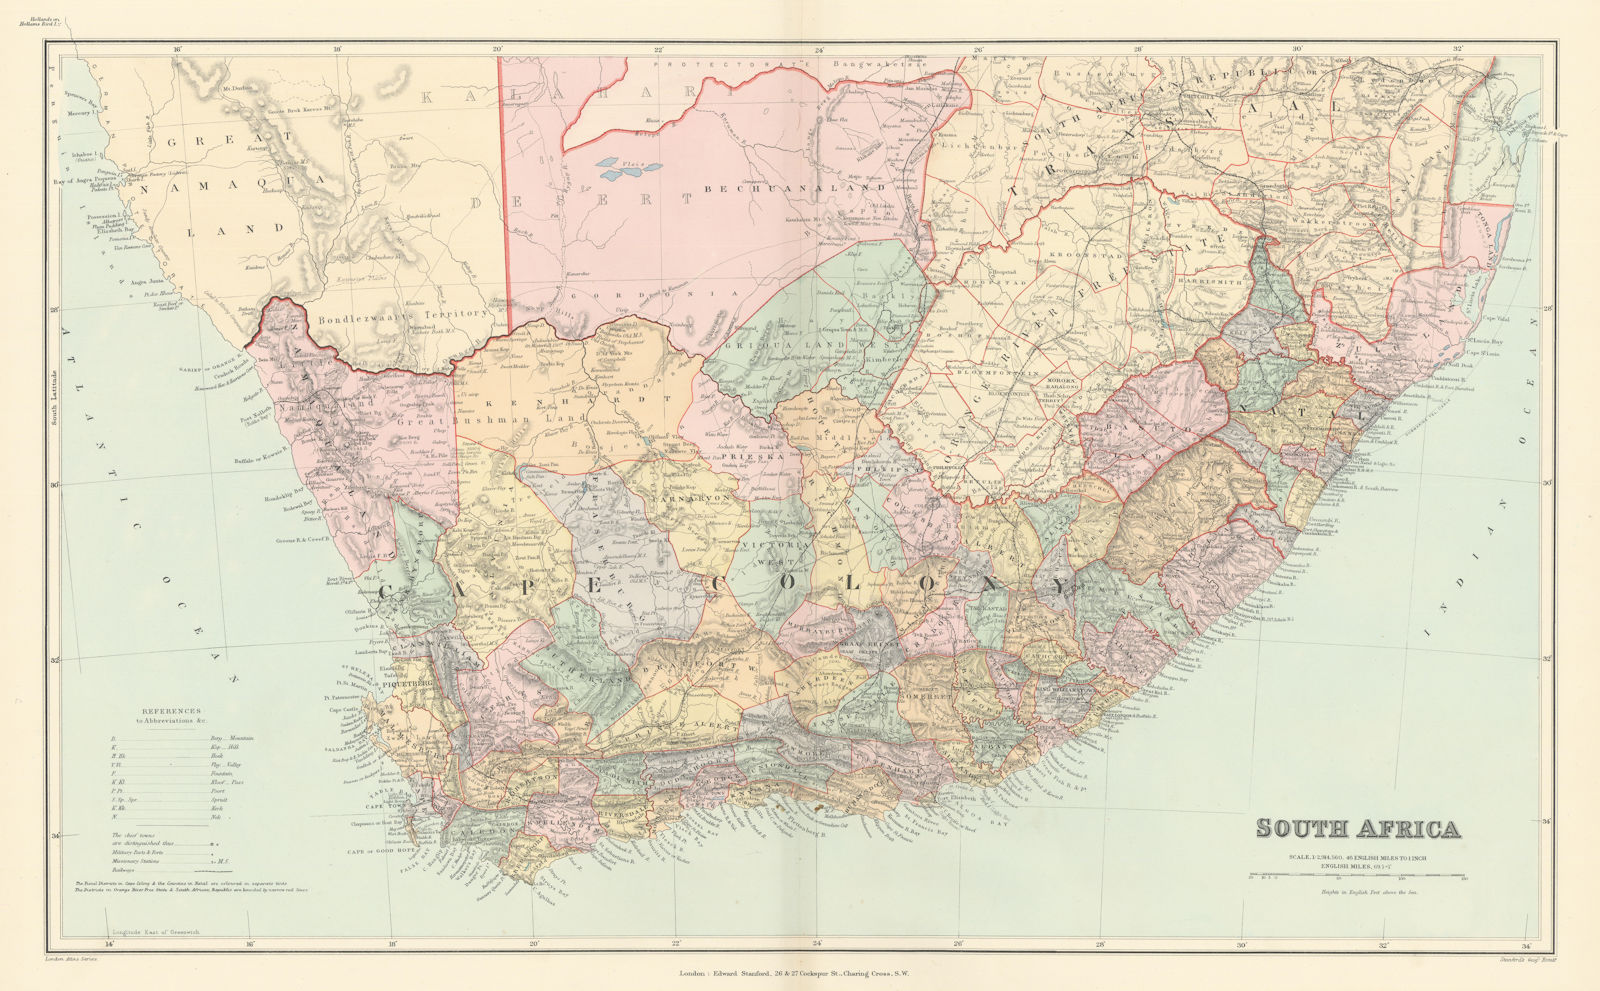 Cape Colony, Natal & Orange River Colony. South Africa 44x70cm STANFORD 1896 map